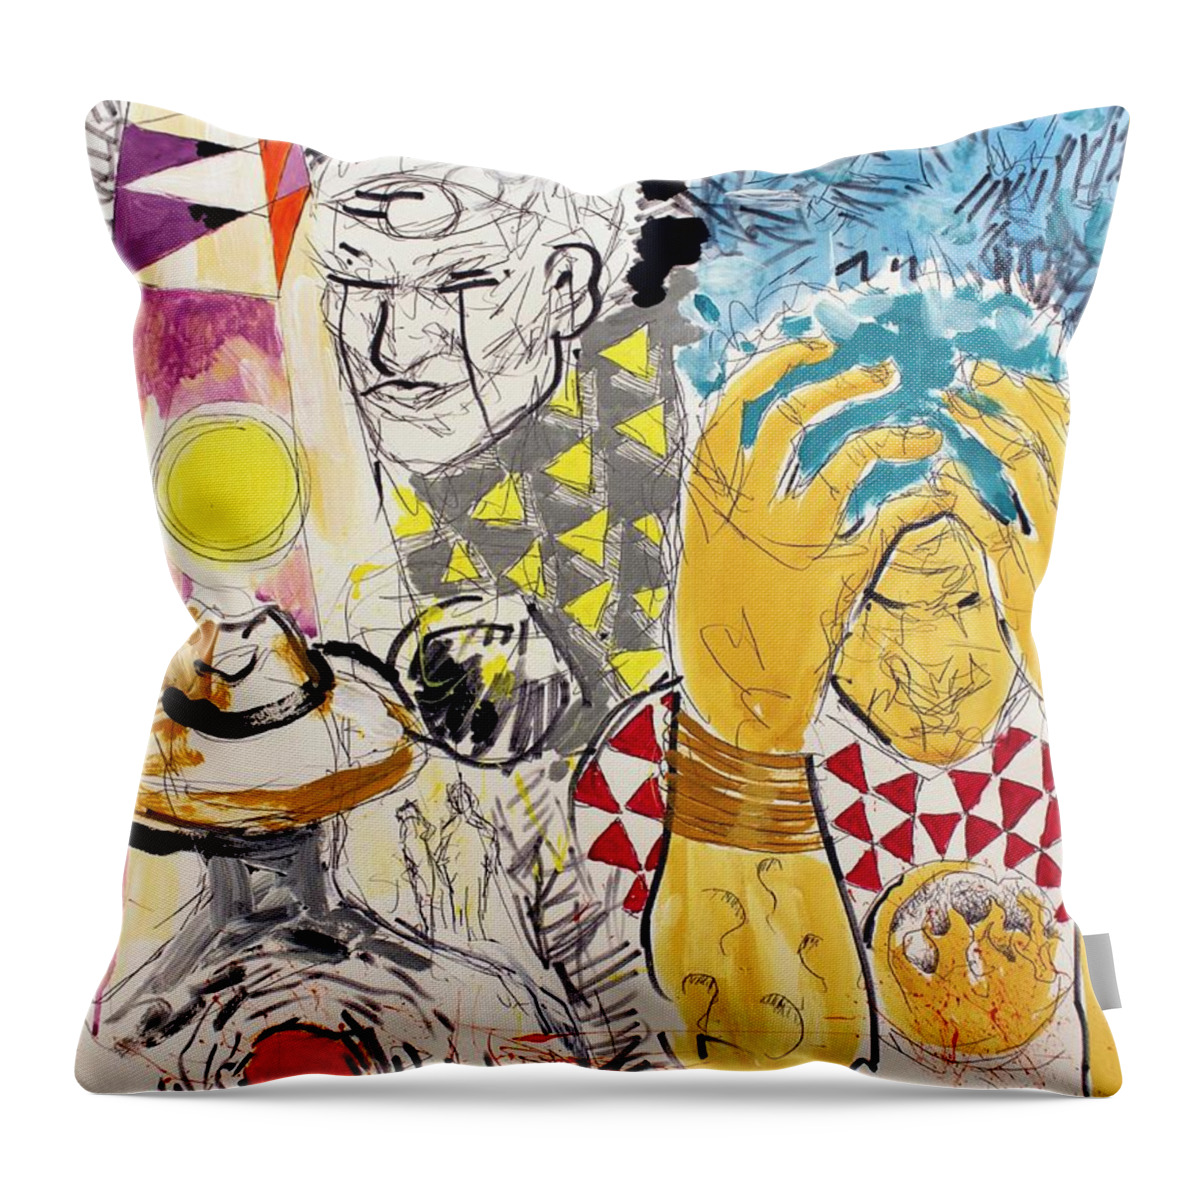 Abstract Throw Pillow featuring the mixed media Stages by Aort Reed